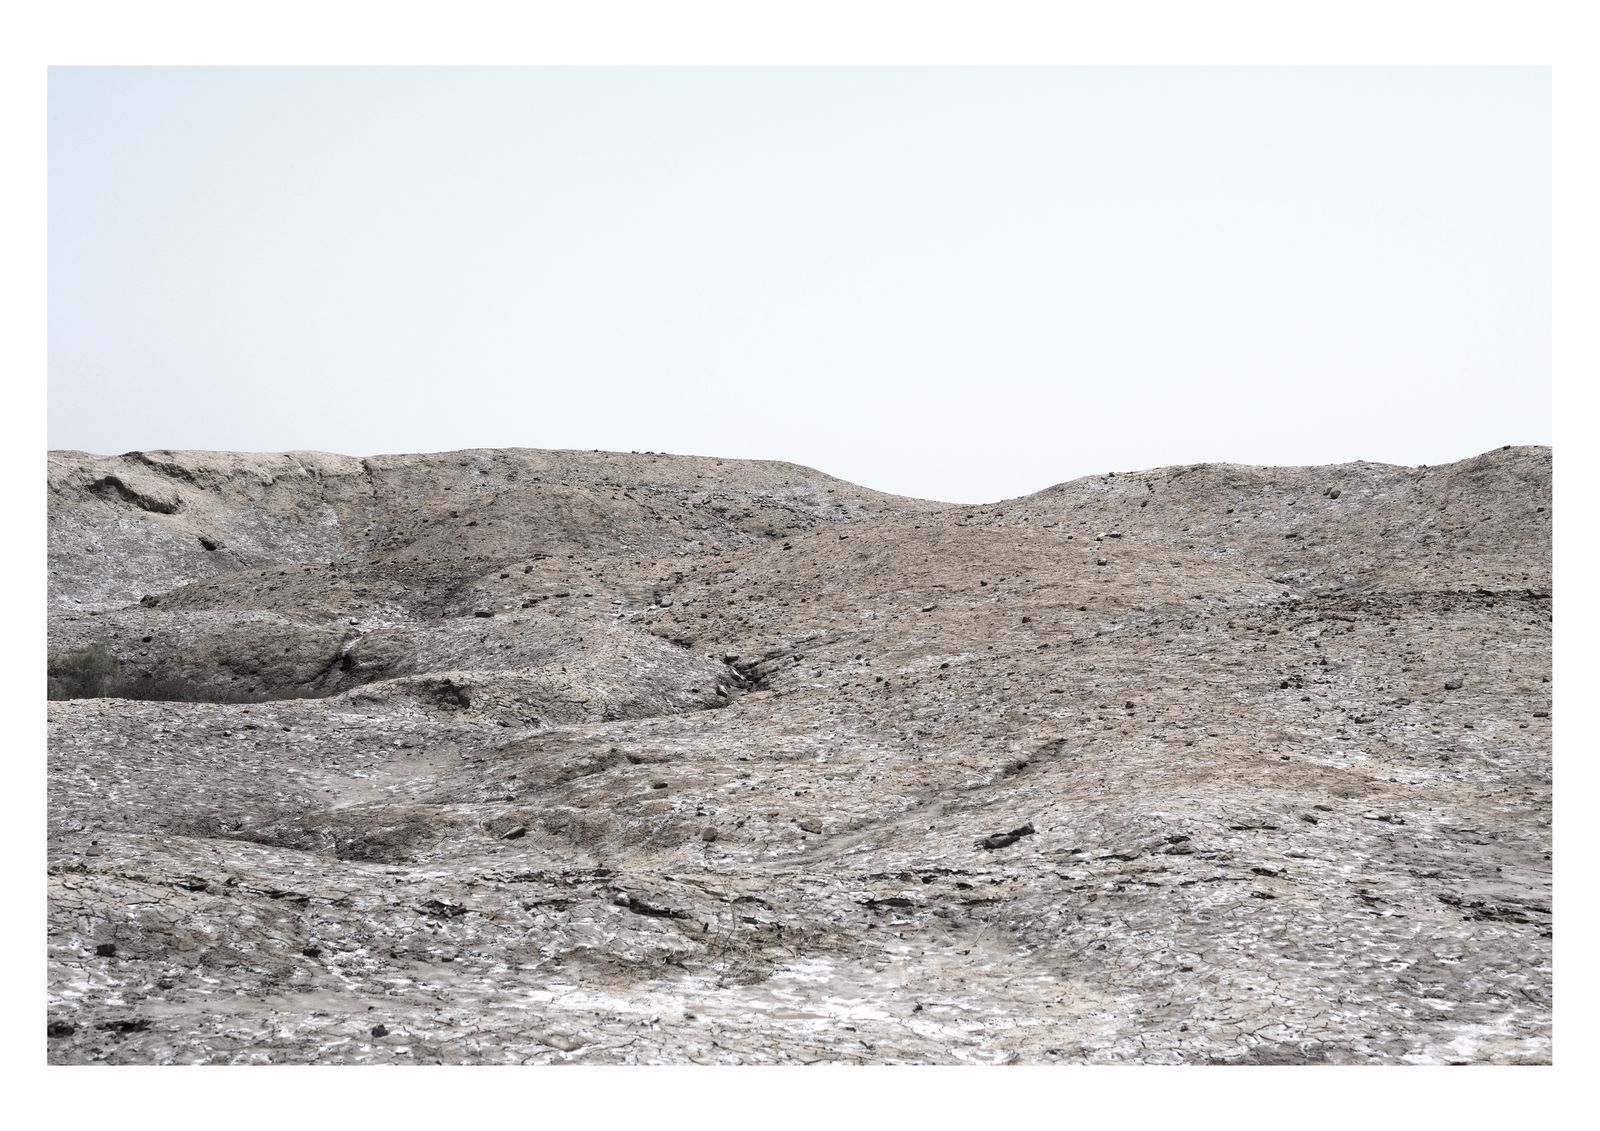 © Emeric Lhuisset - Image from the Last water war, ruins of a future photography project